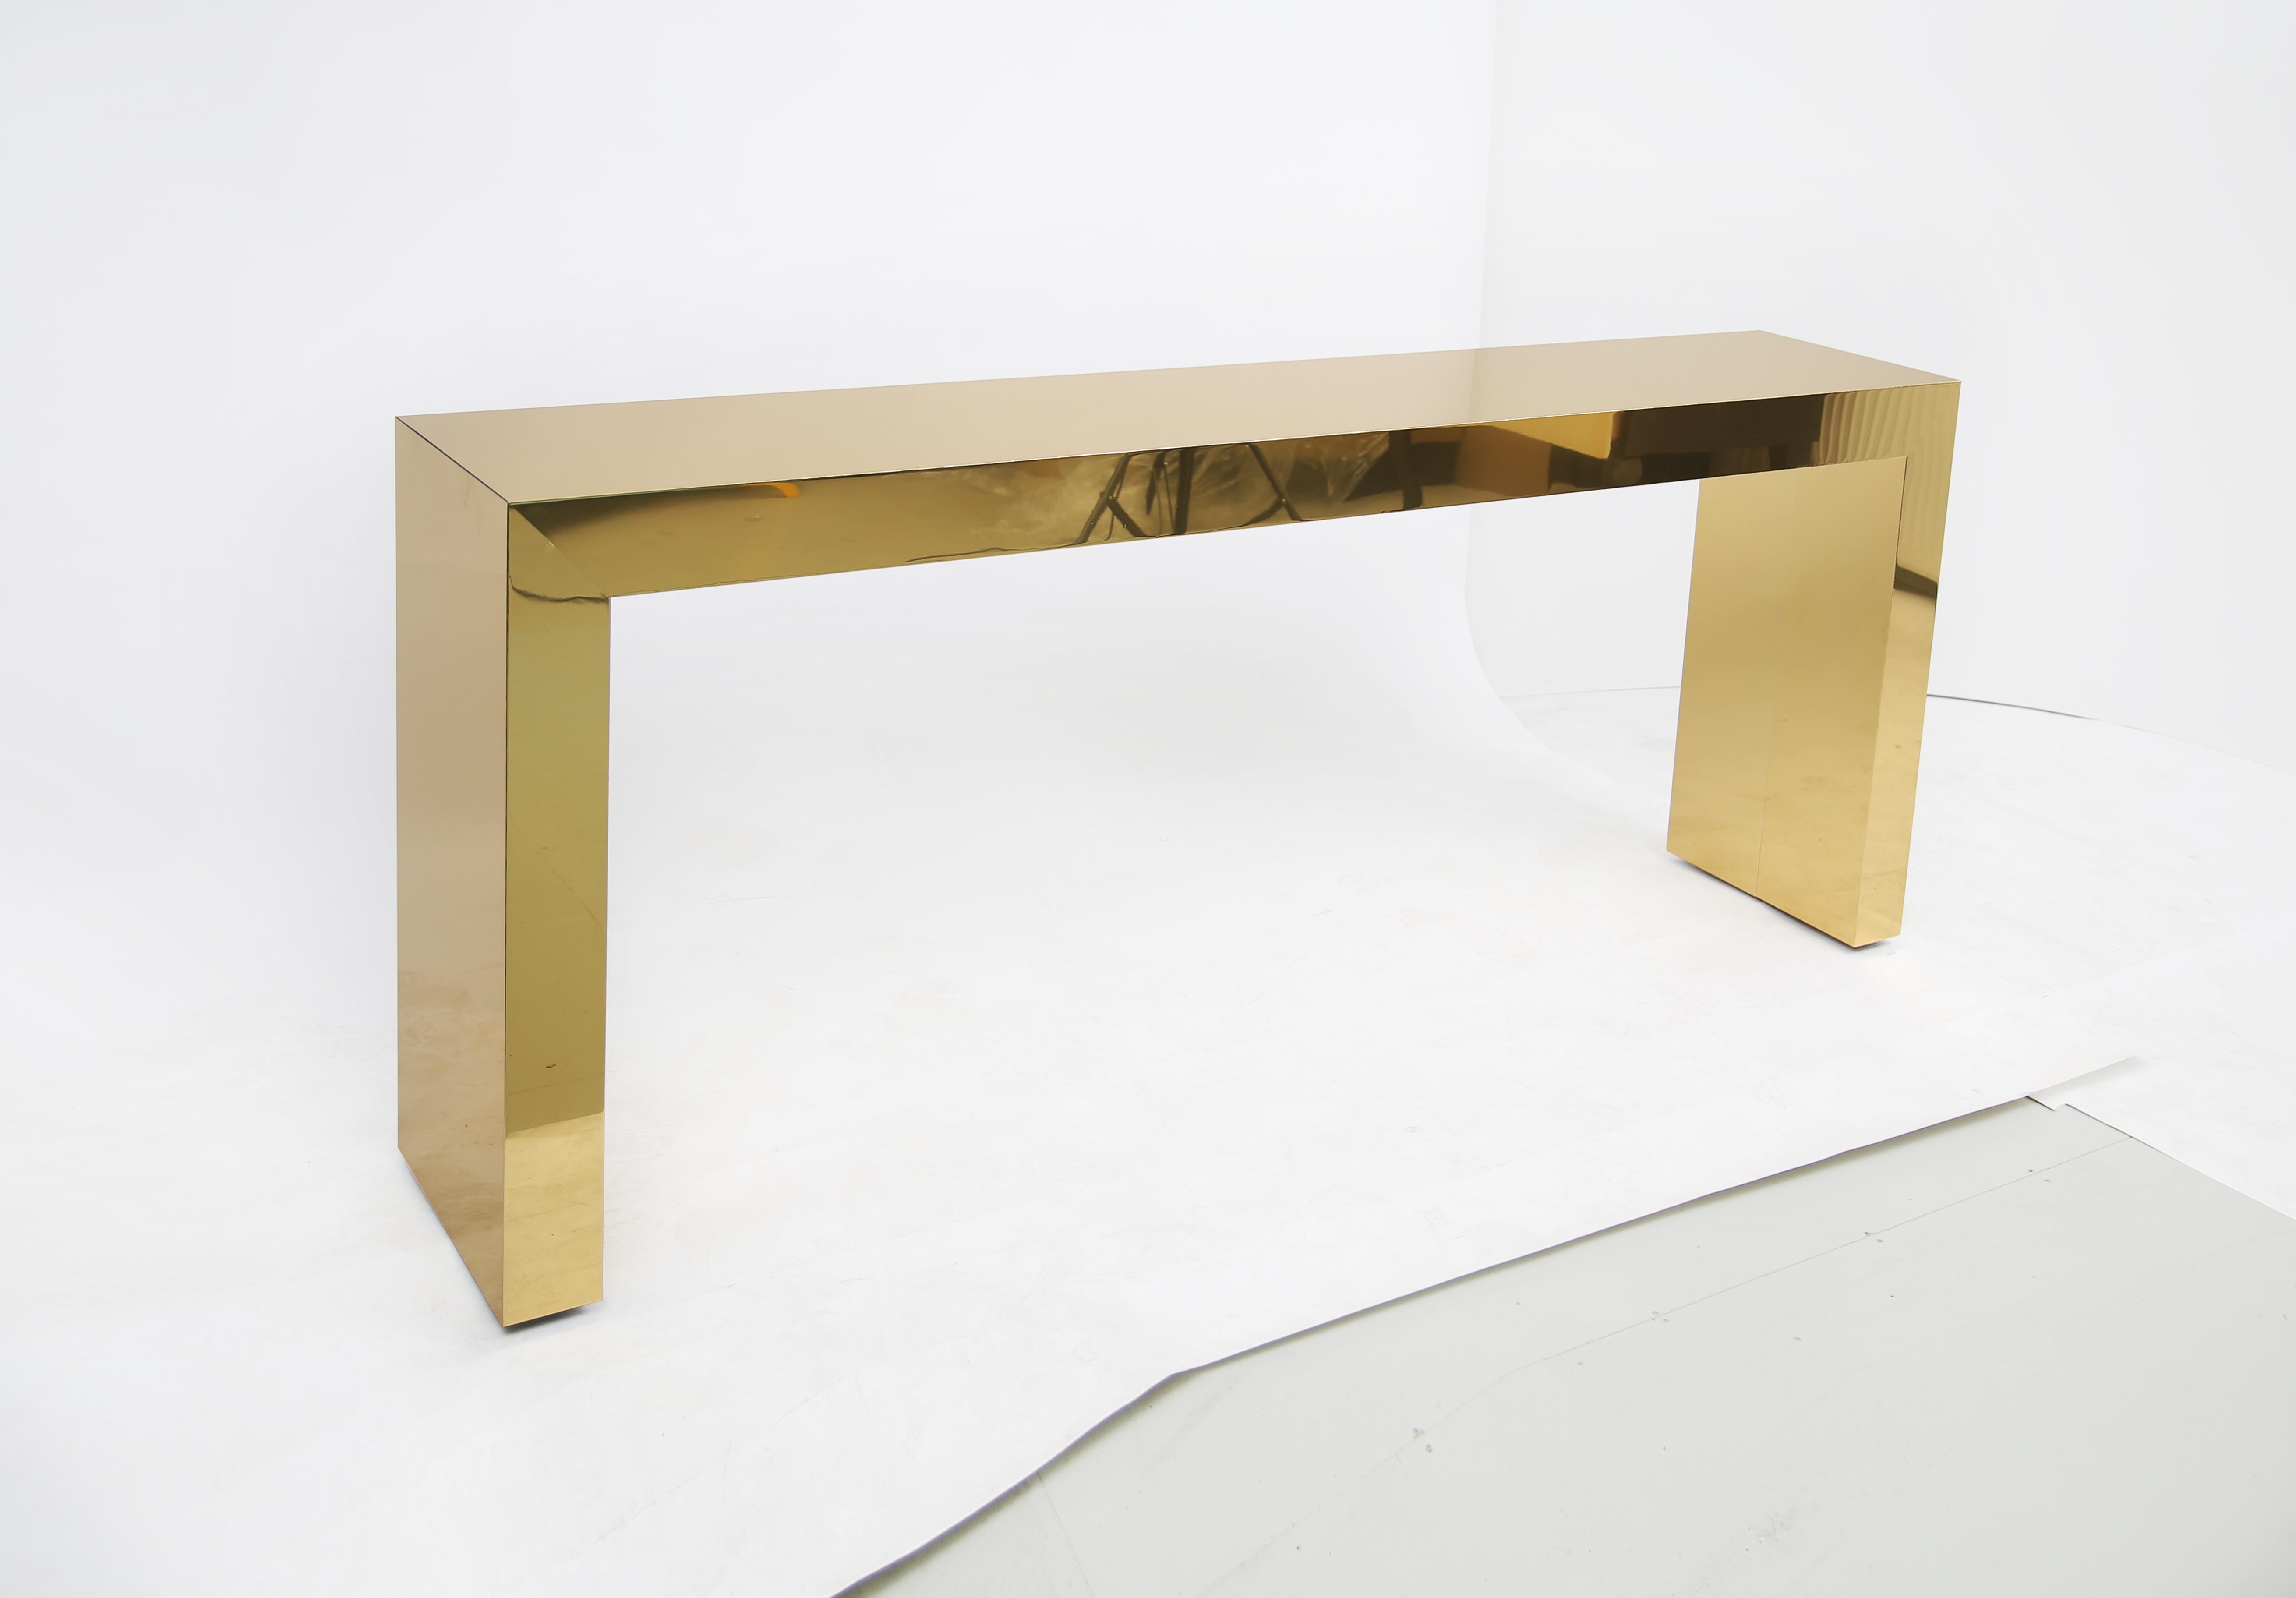 This console table from Denwen collection is completely made of a solid polished brass, which makes the piece stylish and luxurious. It also offers a modern yet sophisticated look to any interior. The Denwen console table is easy to match with other